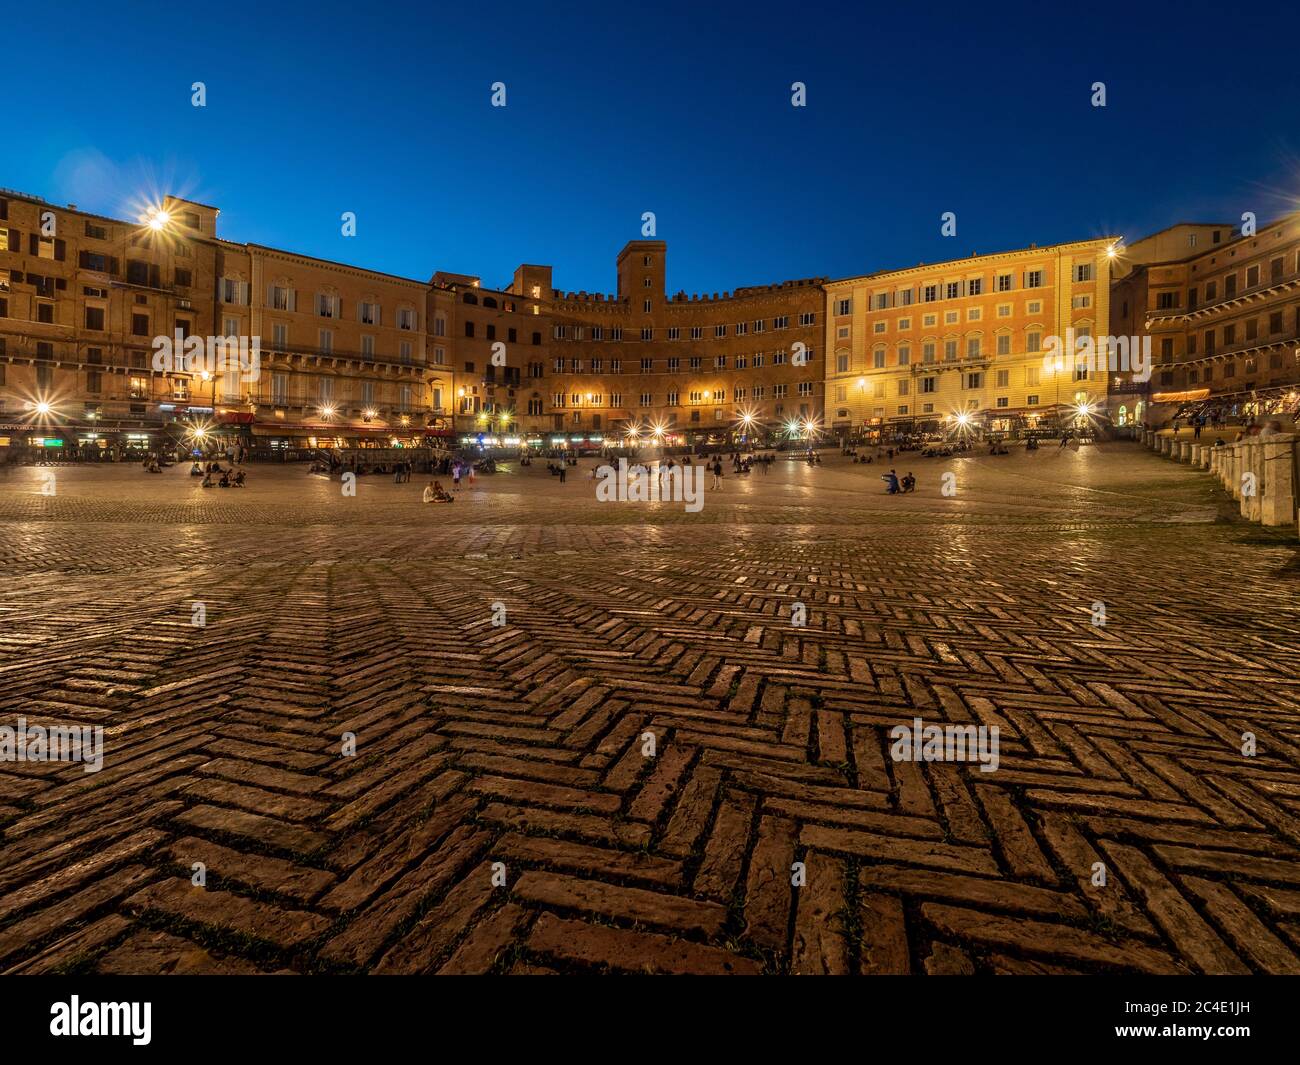 Night time shot of tourists in the Piazza del Campo, Siena. Italy. Stock Photo